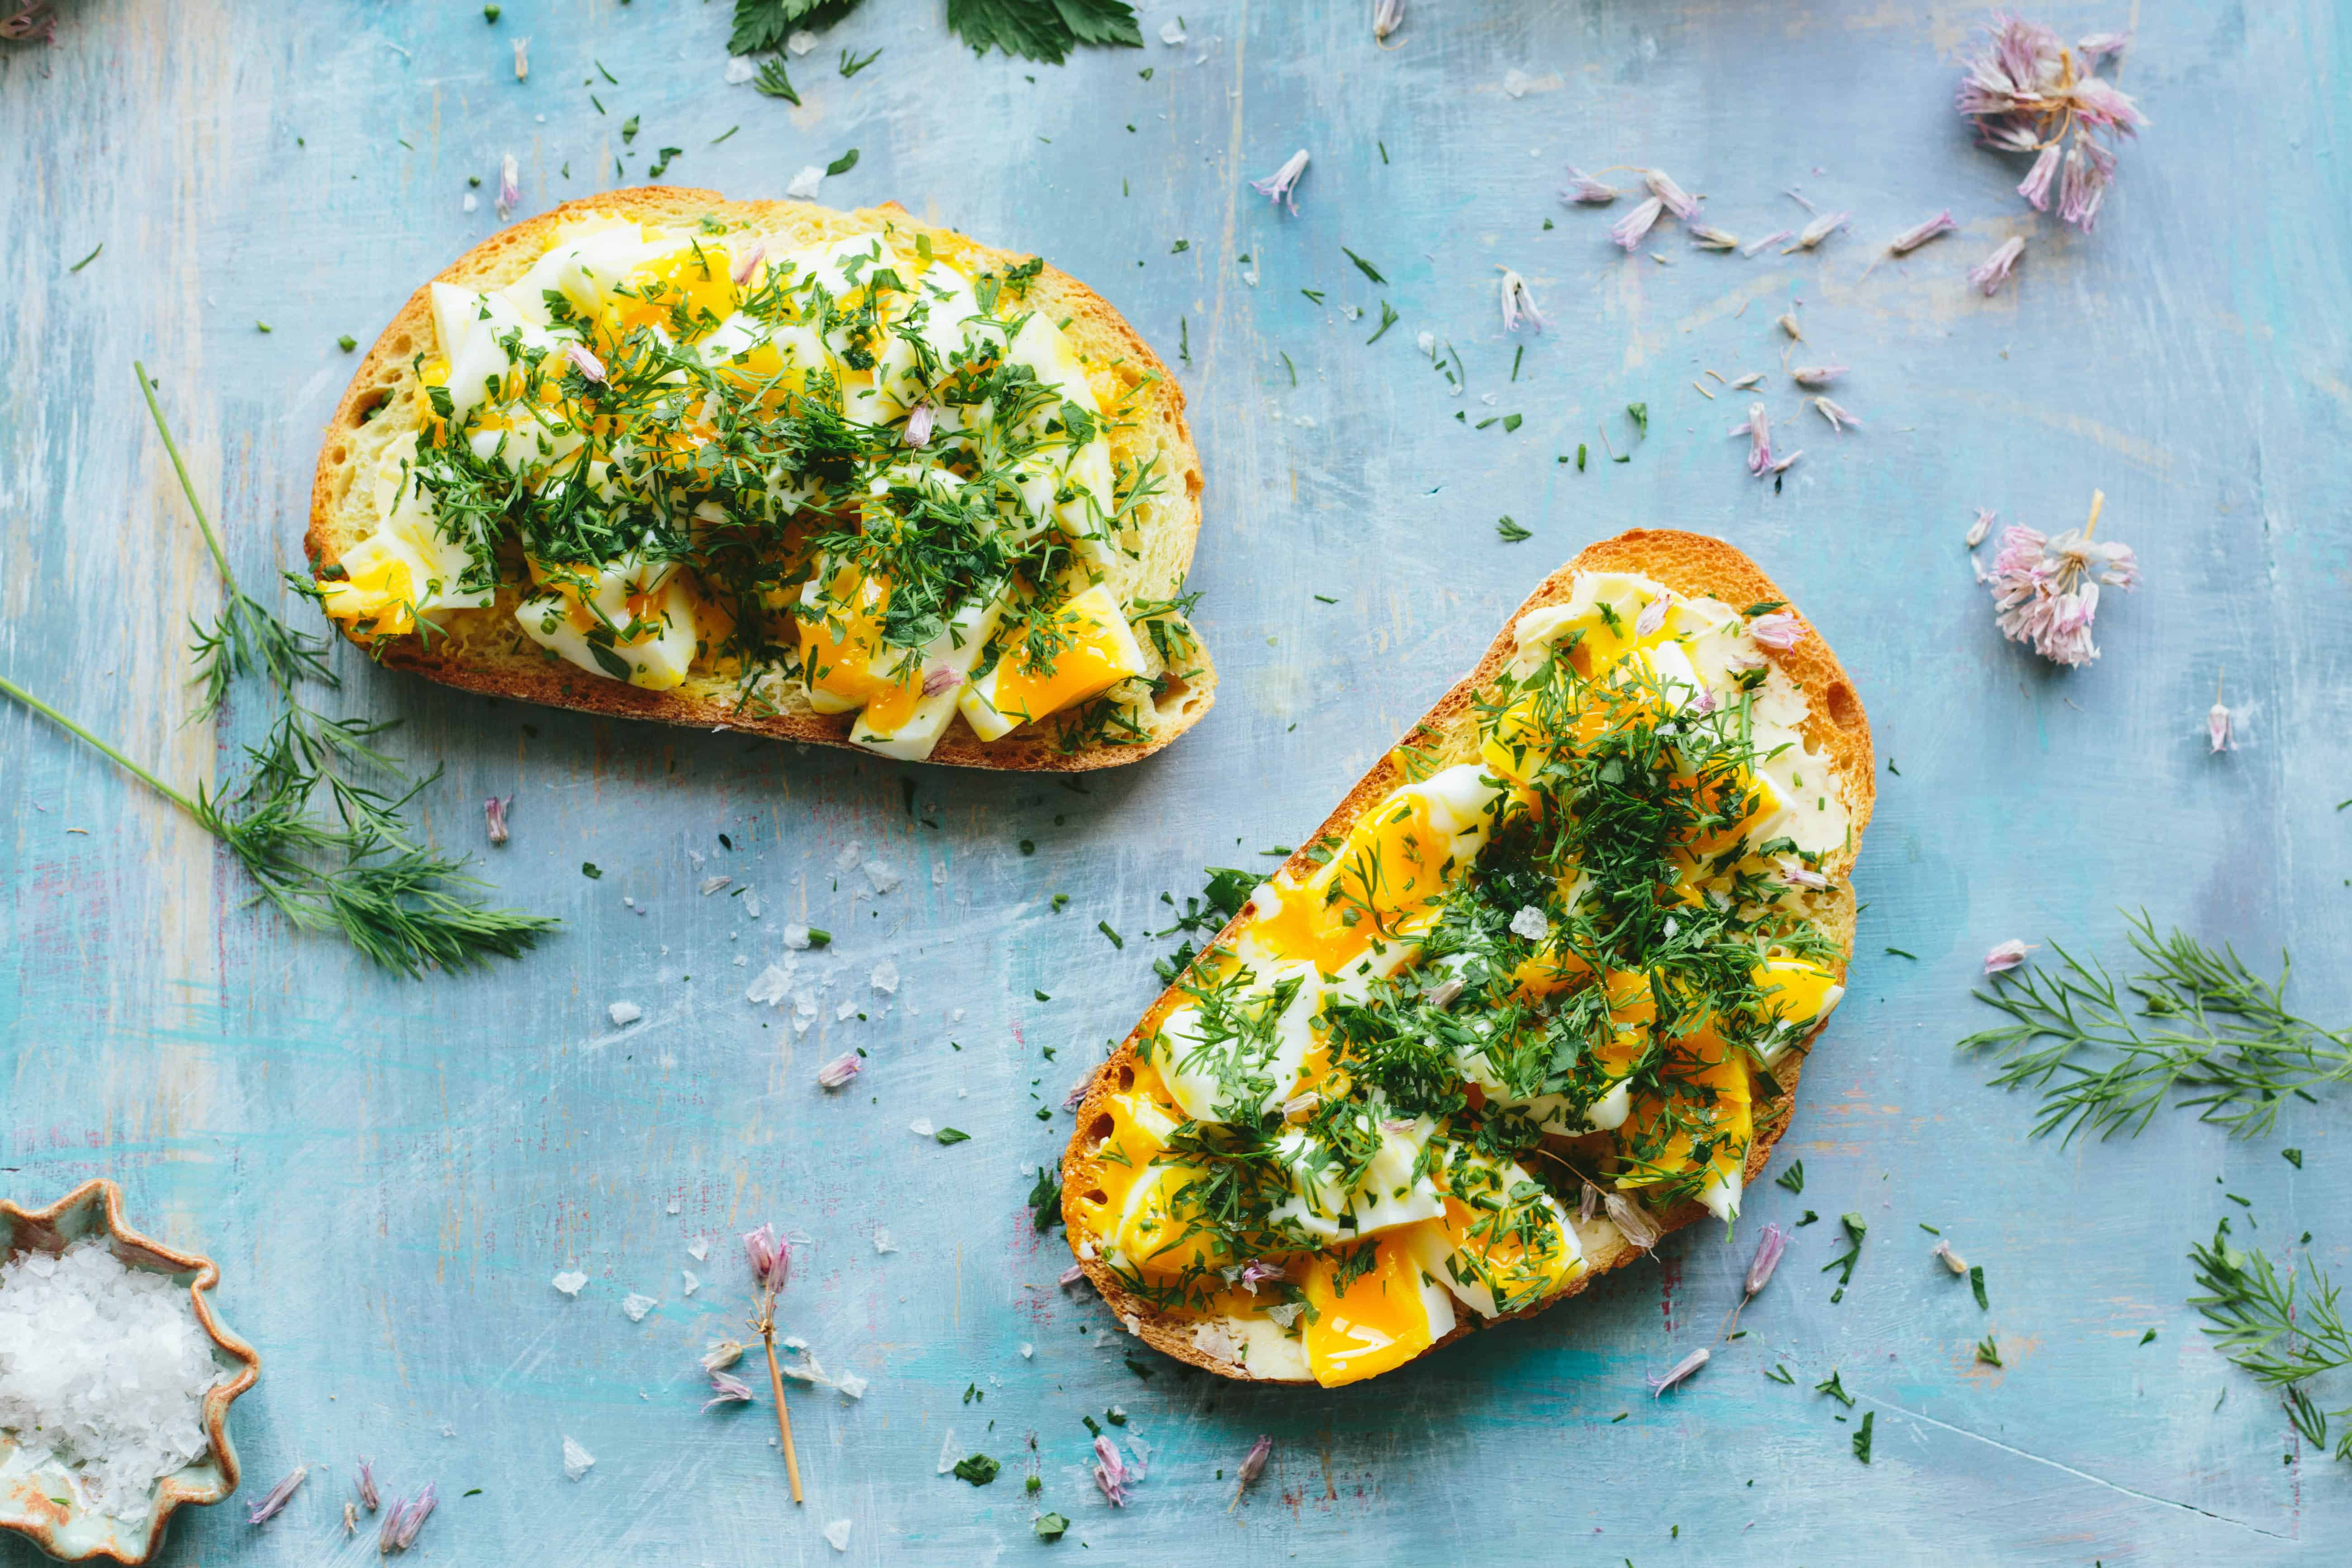 Top view of two slices of toast topped with smashed boiled eggs and chopped fresh herbs.